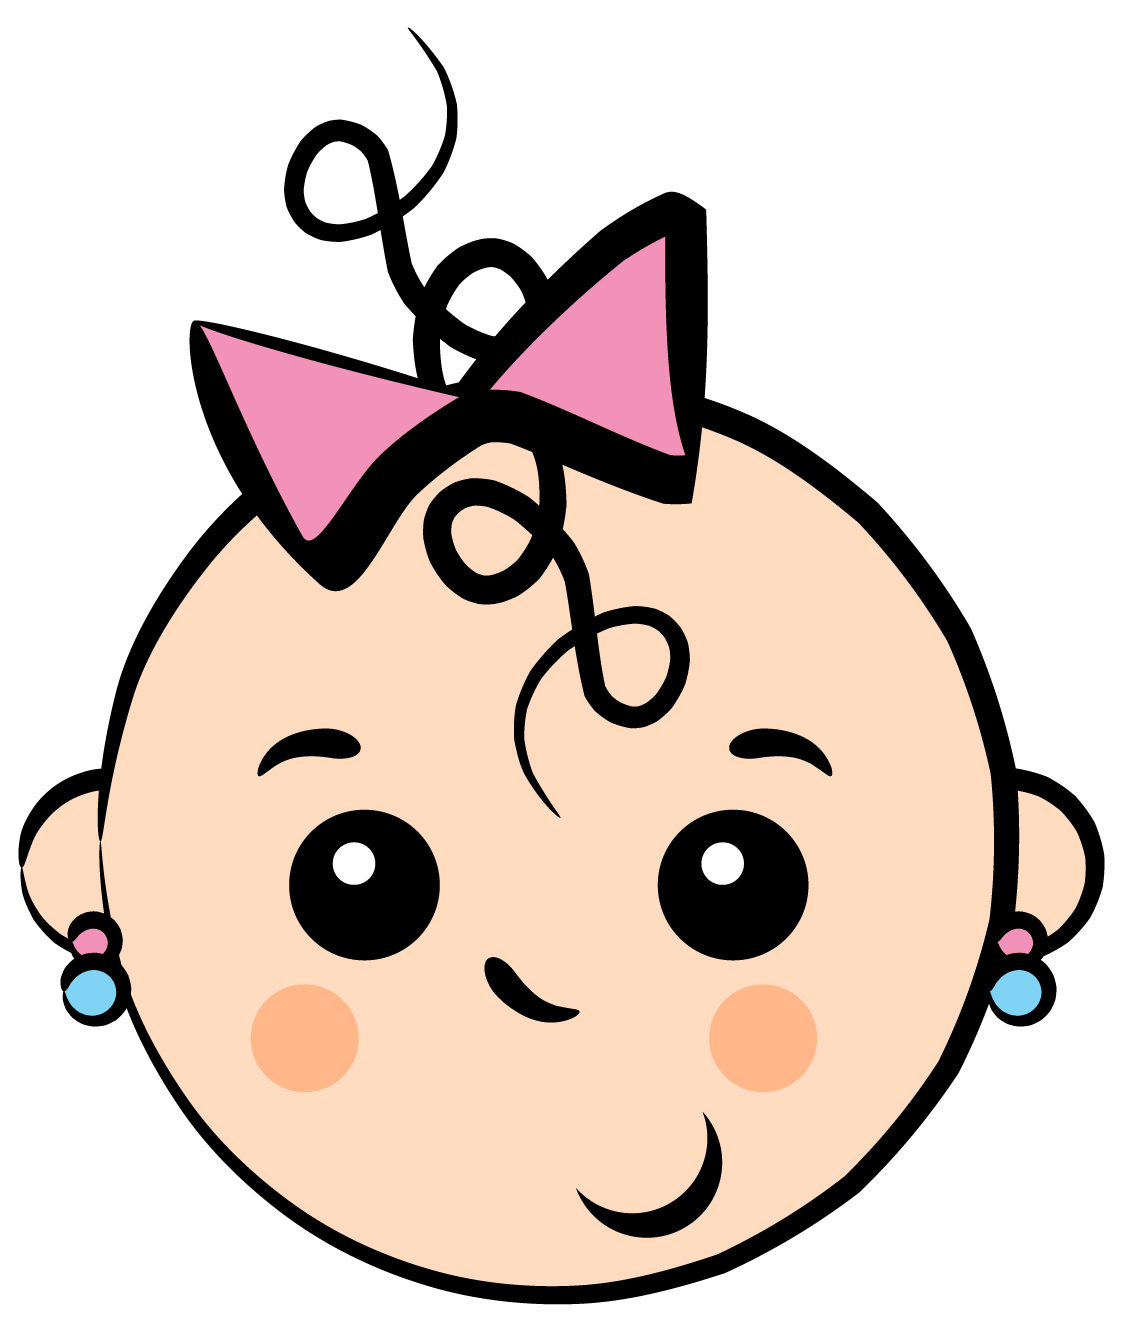 clip art baby girl pictures - photo #35